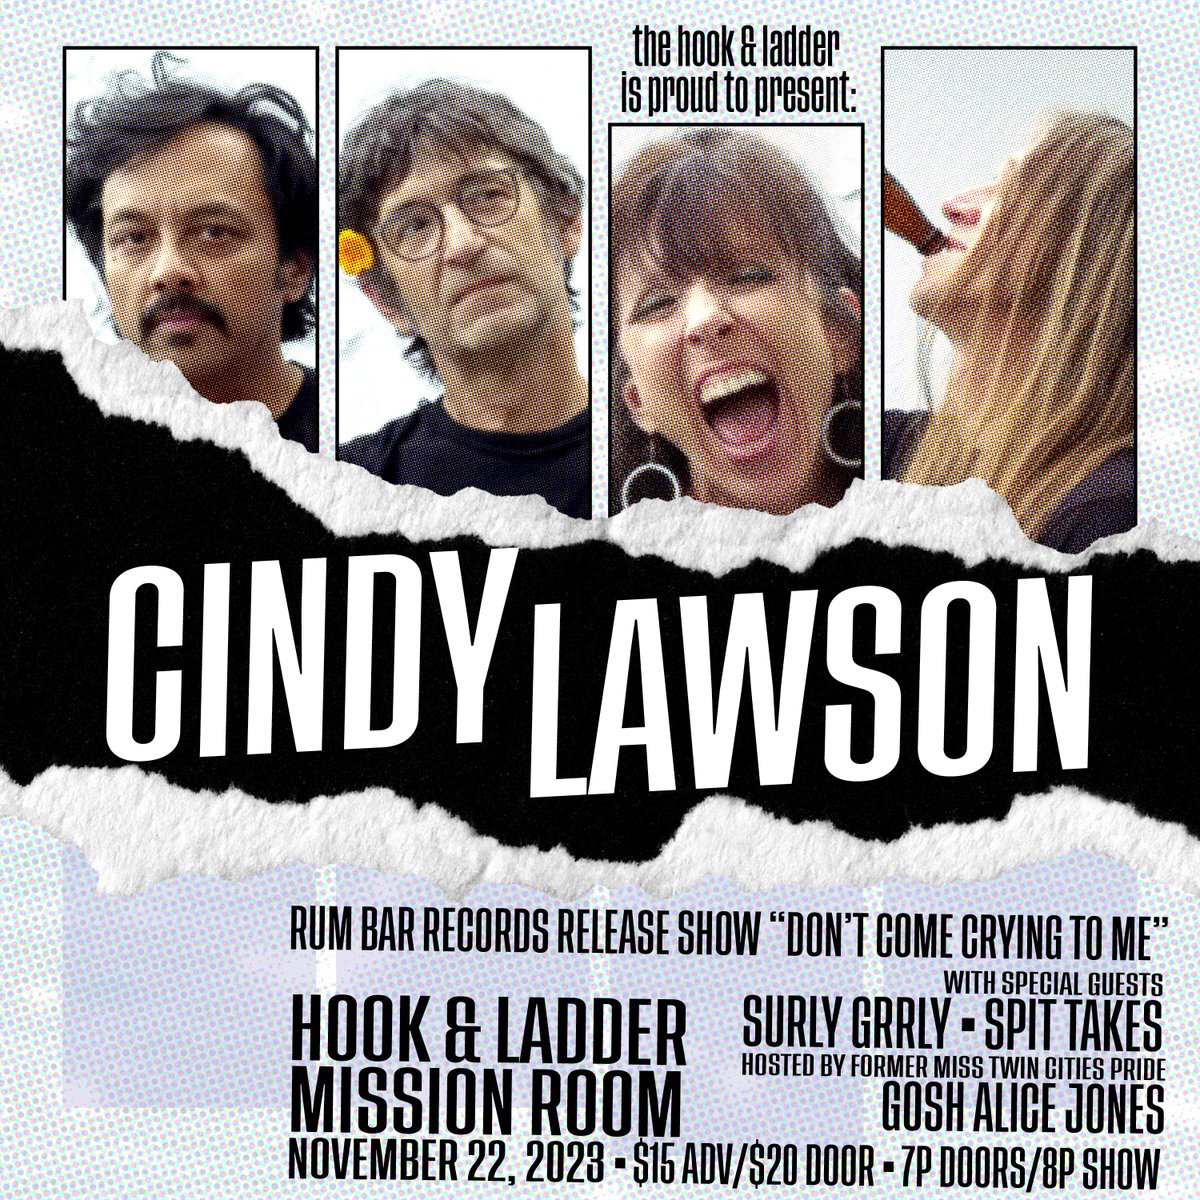 Tix On-Sale NOW! Cindy Lawson 'Don't Come Crying To Me' Rum Bar Records Release Party w/ Spit Takes & Surly Grrly on Wed, Nov 22 -- BUY TIX ->>…ndyLawson-AlbumRelease.eventbrite.com -- @RumBarRecords @spittakesmpls @SurlyGrrly @GoshAliceJones #TheHookMpls #TheMissionRoom #MnMusic #Rock #Punk